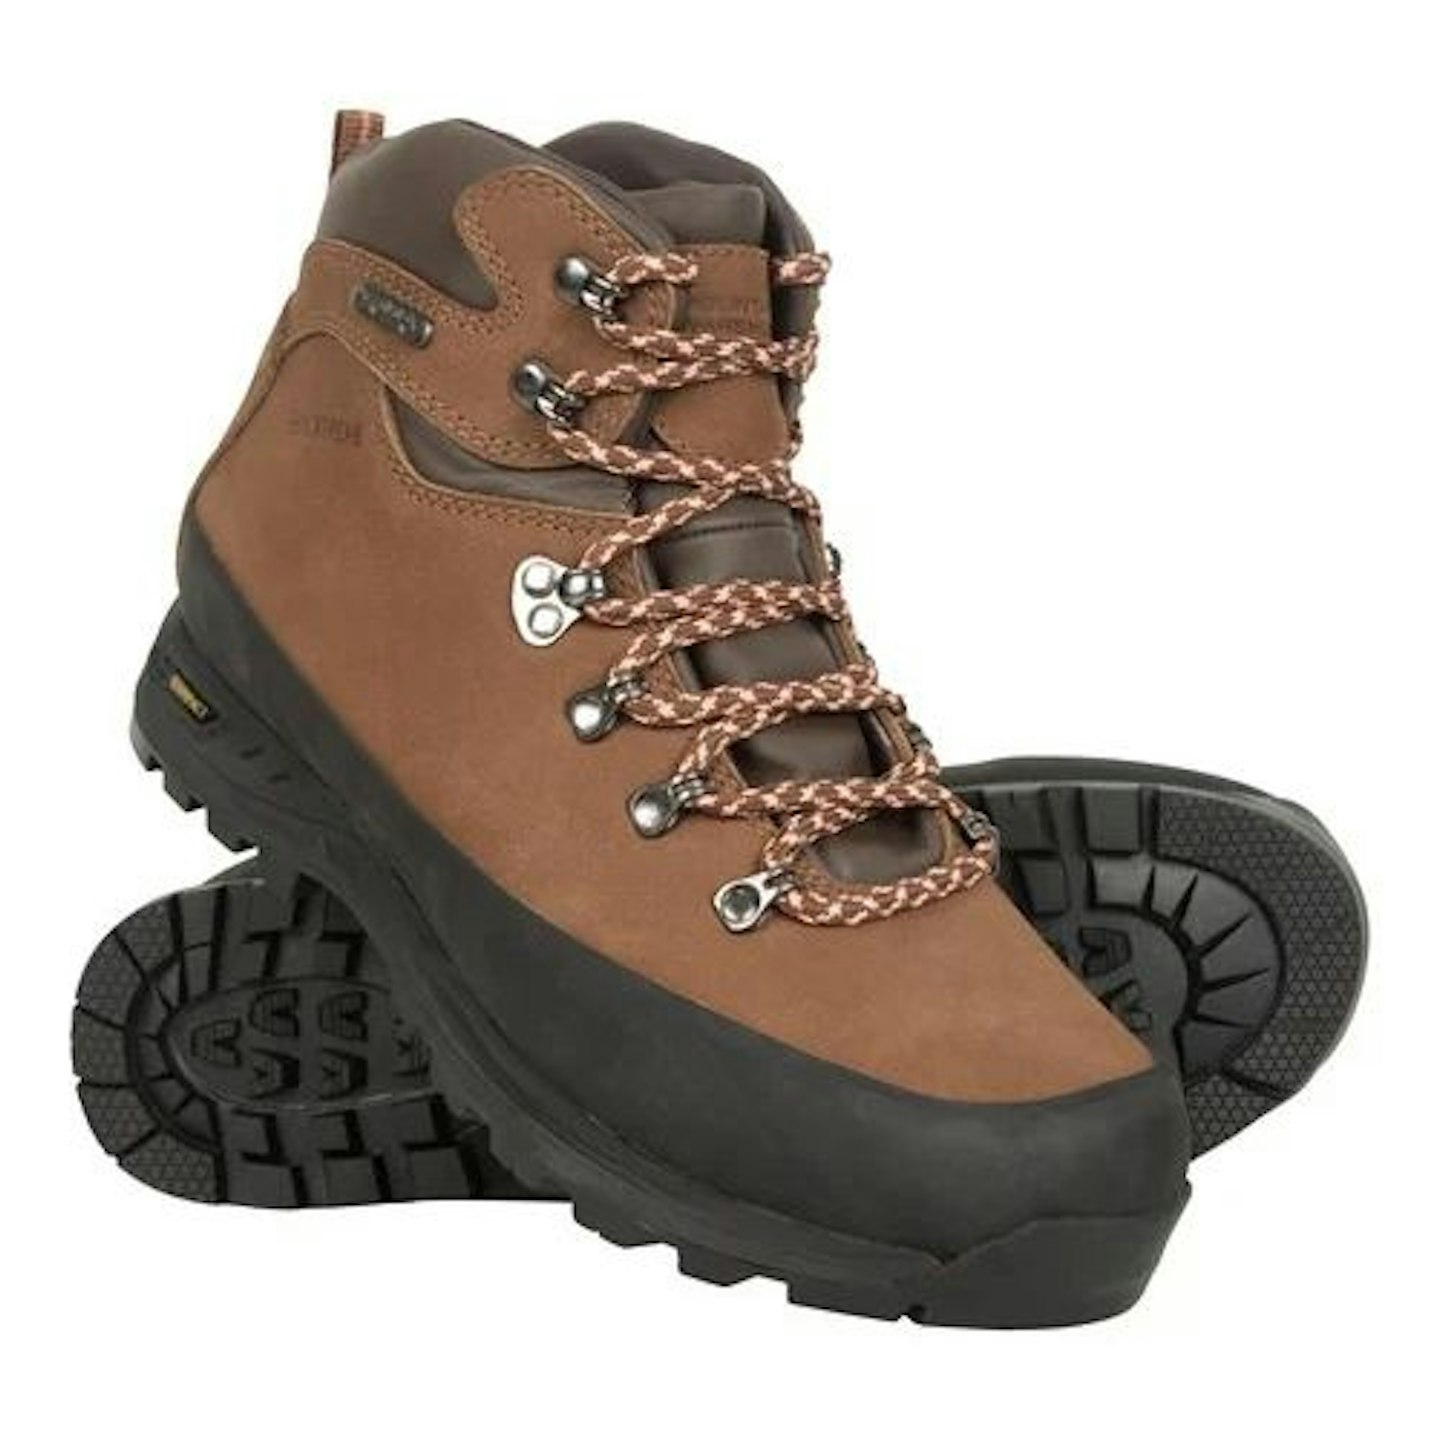 Extreme Quest Women's Waterproof Isogrip Boots